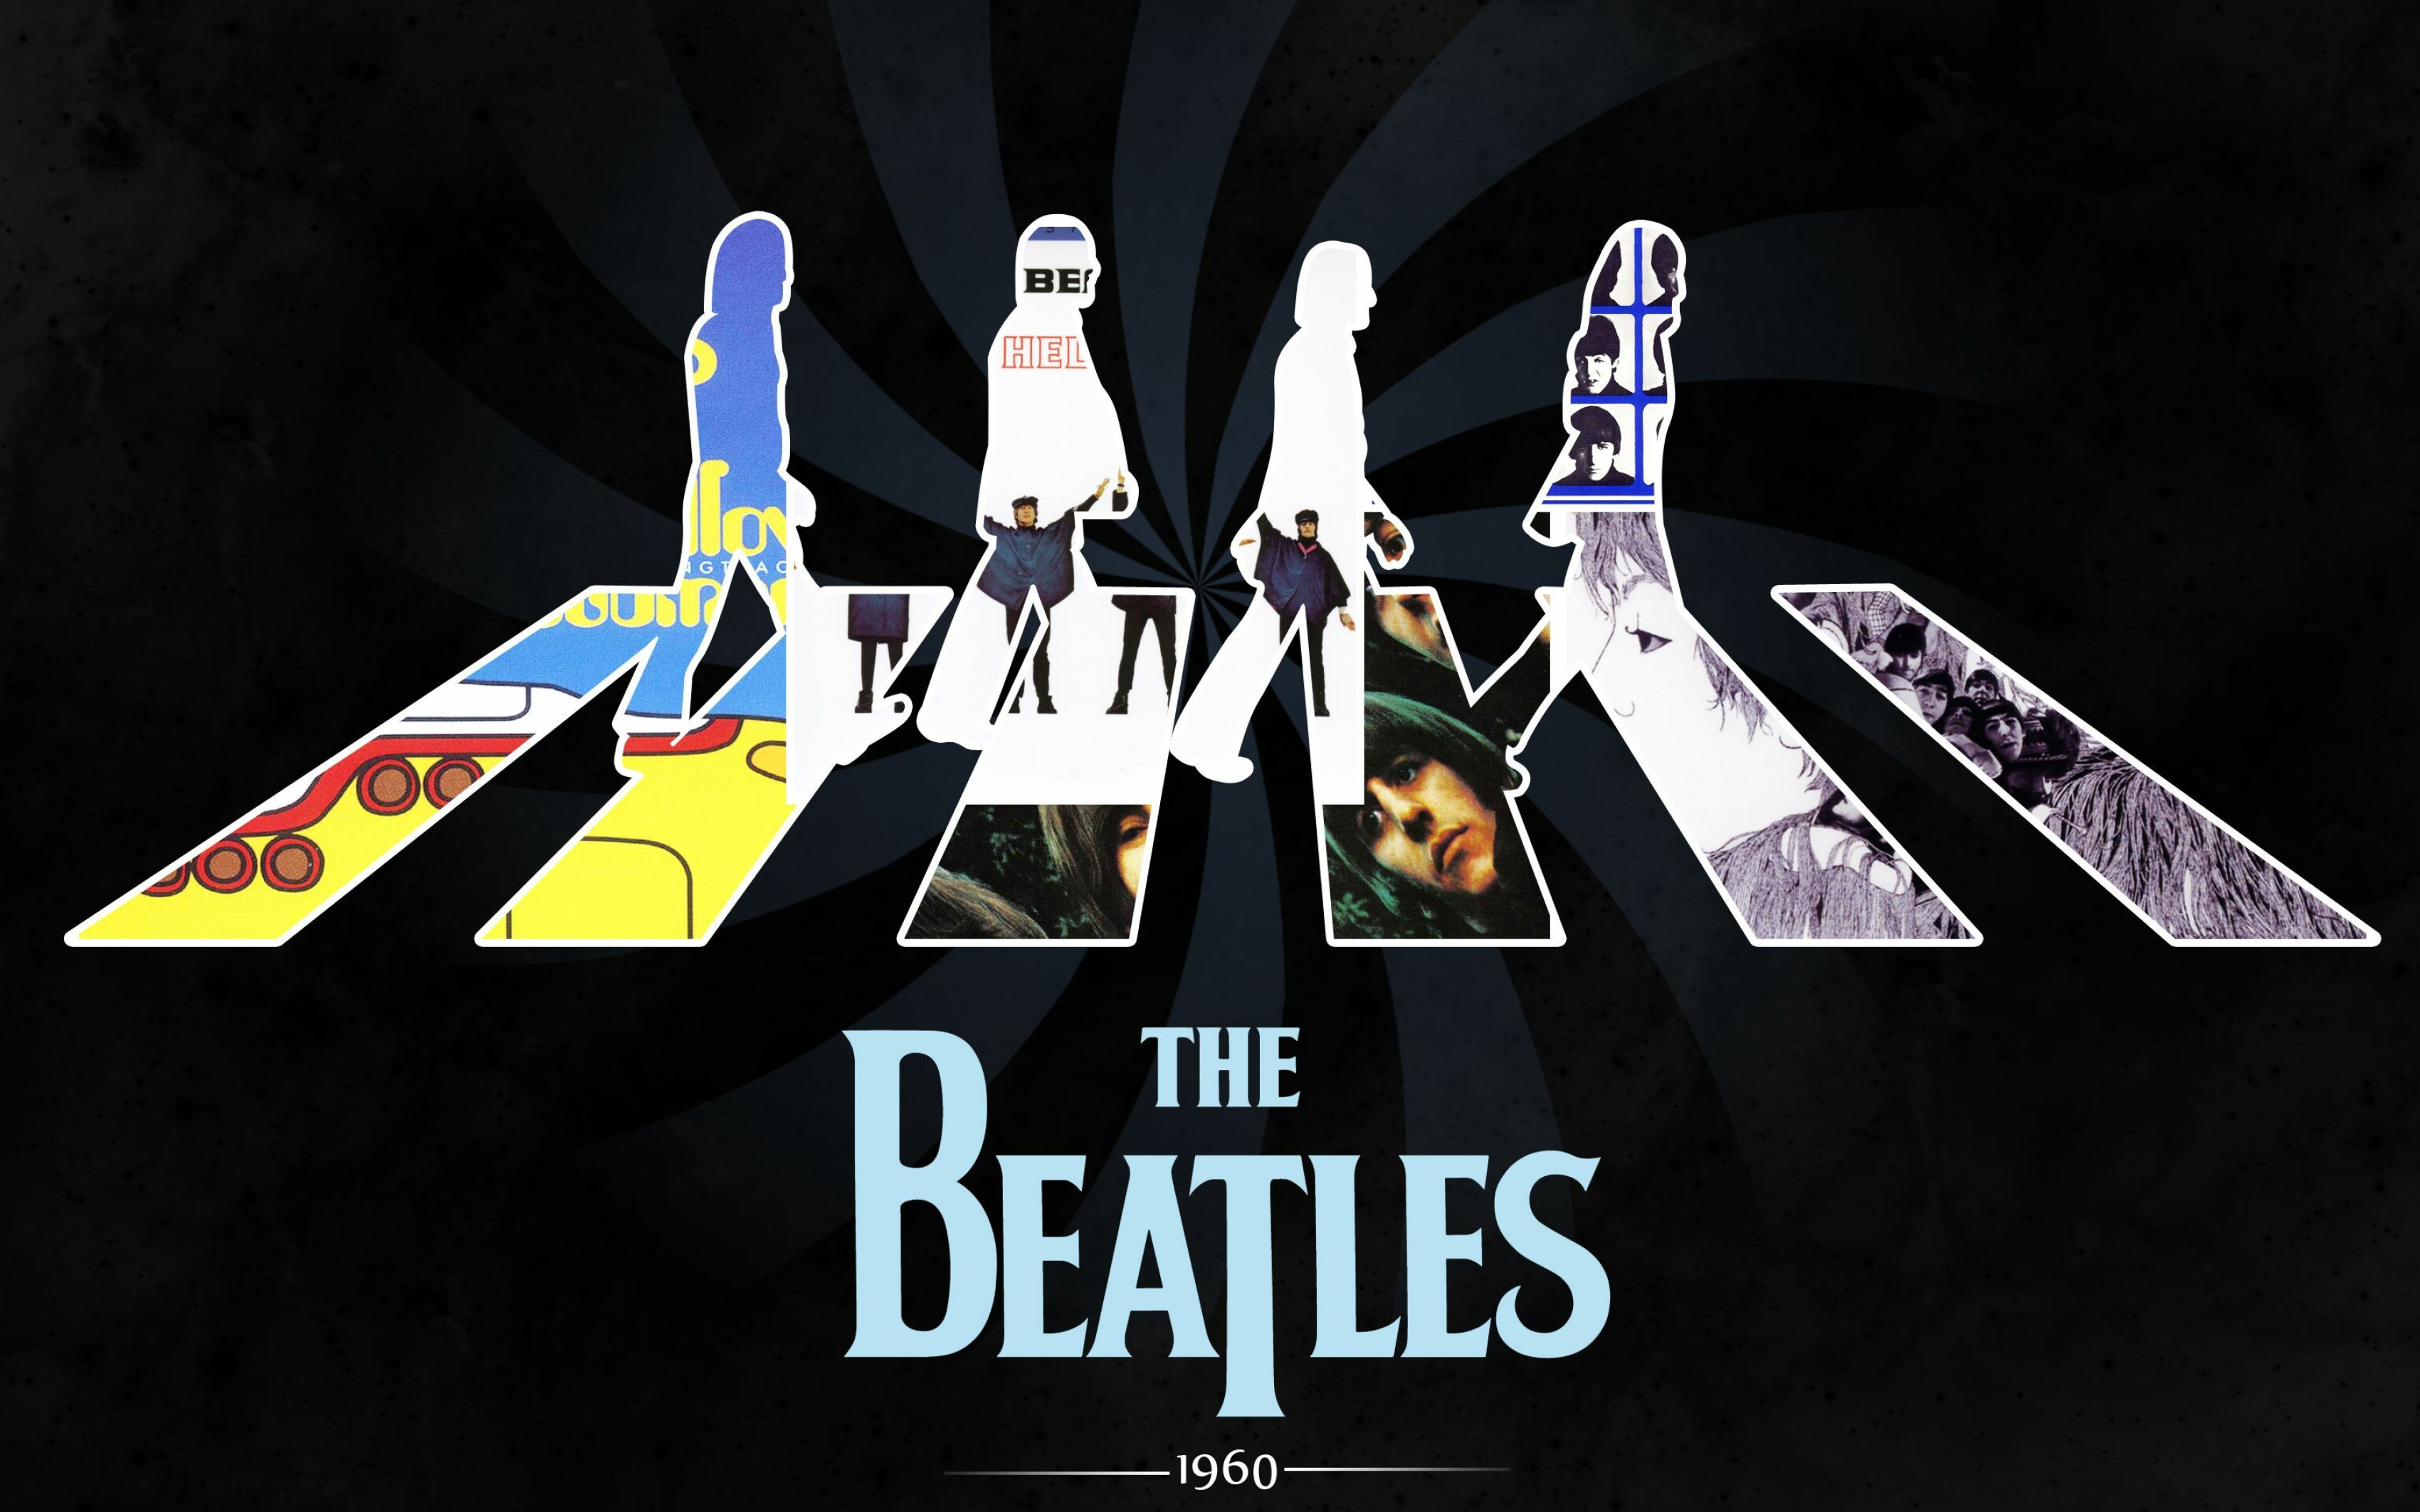 The Beatles: An English rock band, formed in Liverpool in 1960. 3400x2130 HD Wallpaper.